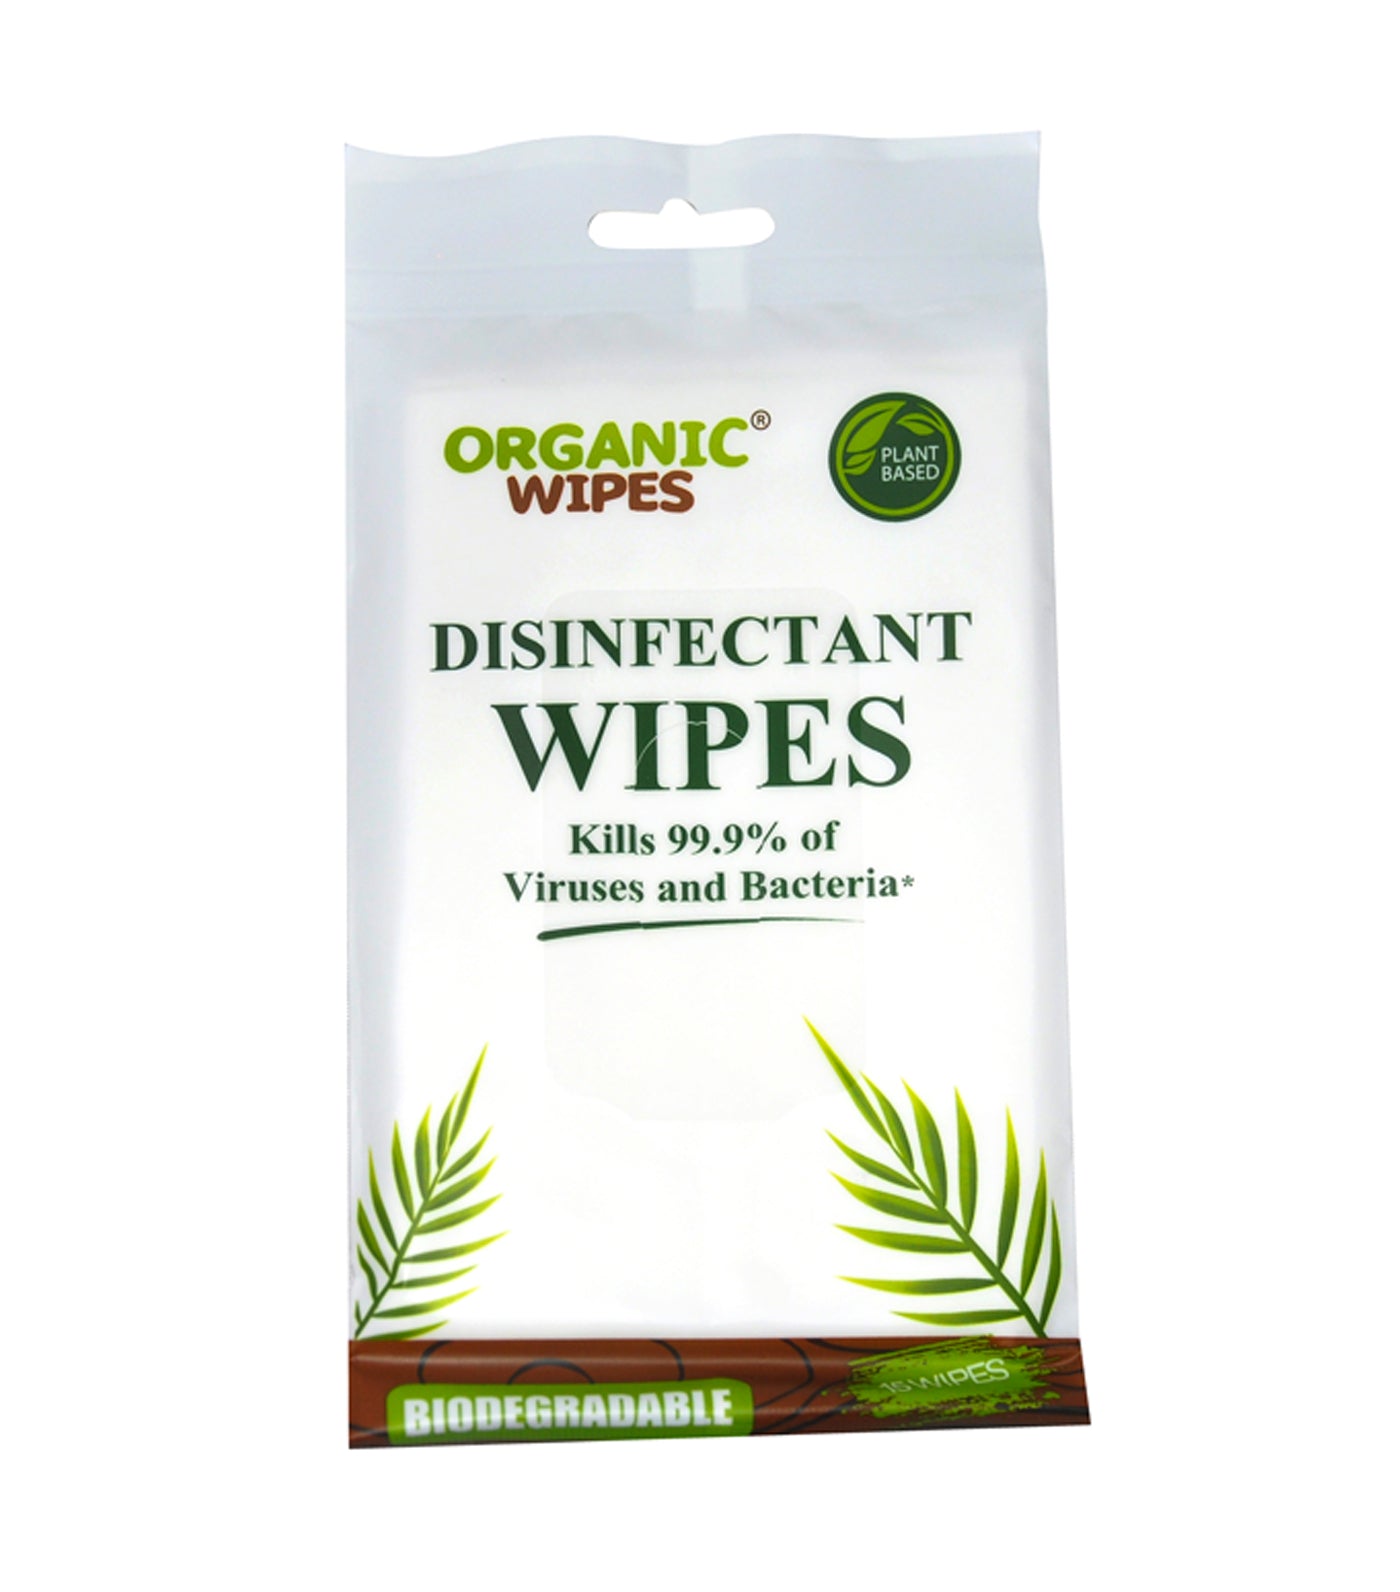 Disinfectant Wipes (15 Wipes) - Pack of 6